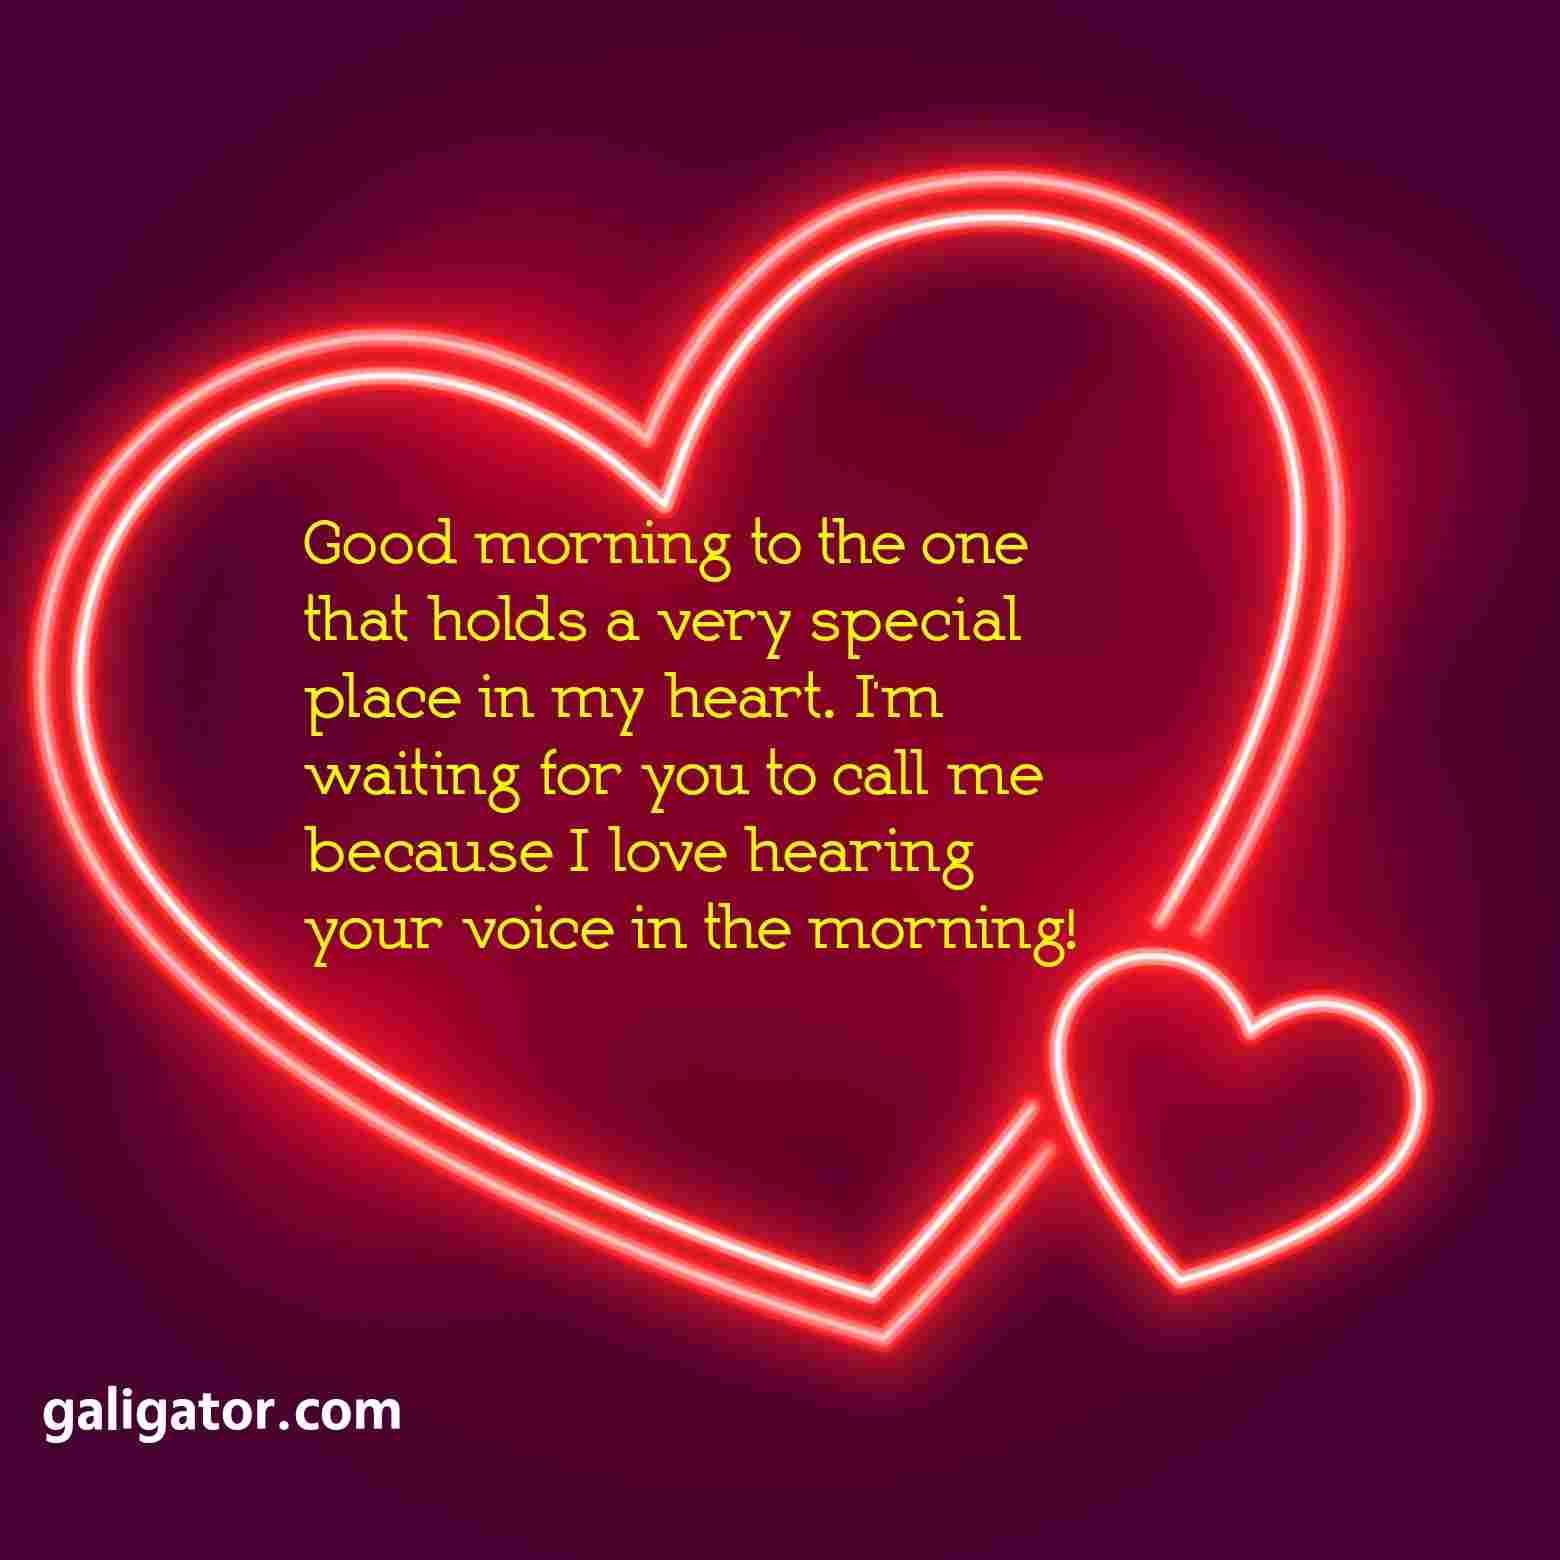 heart touching good morning love quotes, good morning my love quotes , love romantic good morning quotes, good morning love quotes , good morning images with love quotes , good morning love quotes for him, love husband good morning quotes, good morning love quotes for her, love inspirational good morning quotes , love romantic love good morning quotes